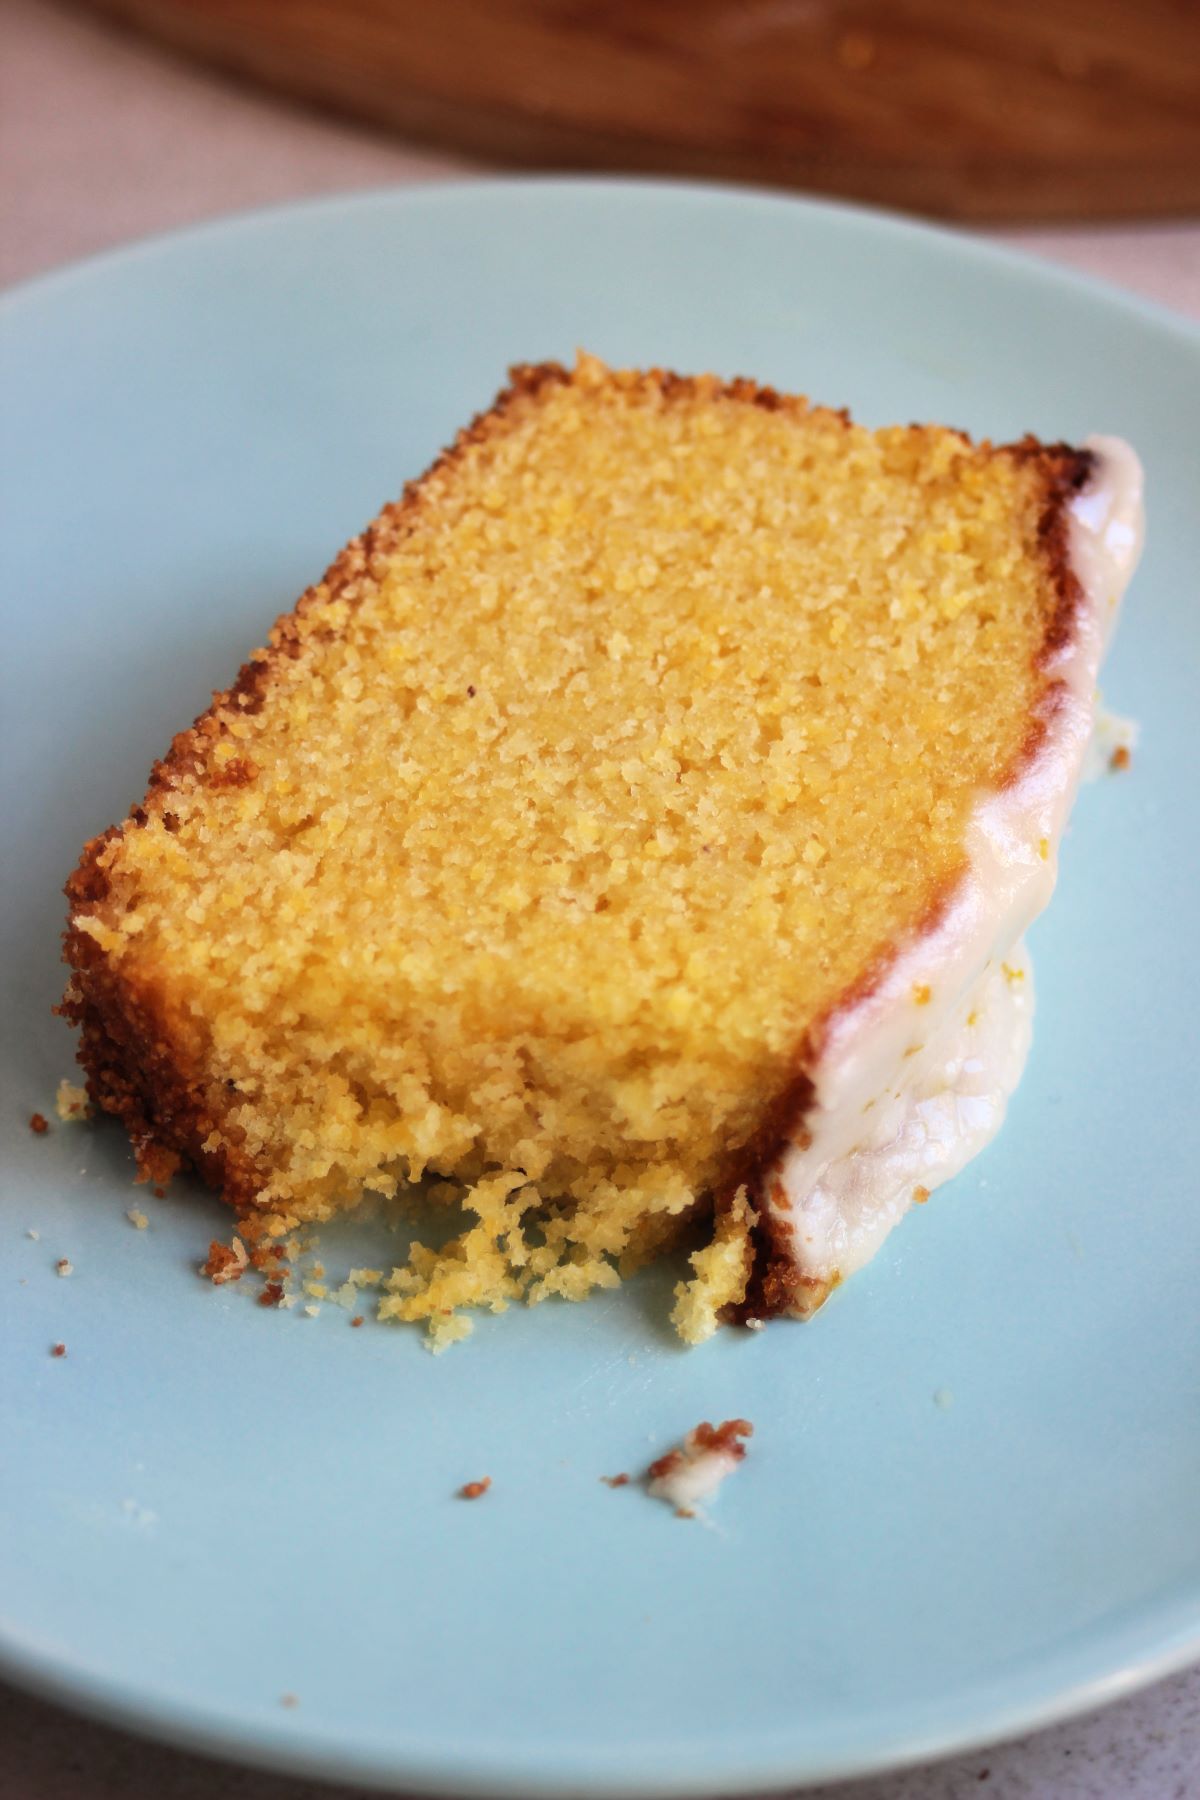 A slice of orange cake with icing on a light blue plate.